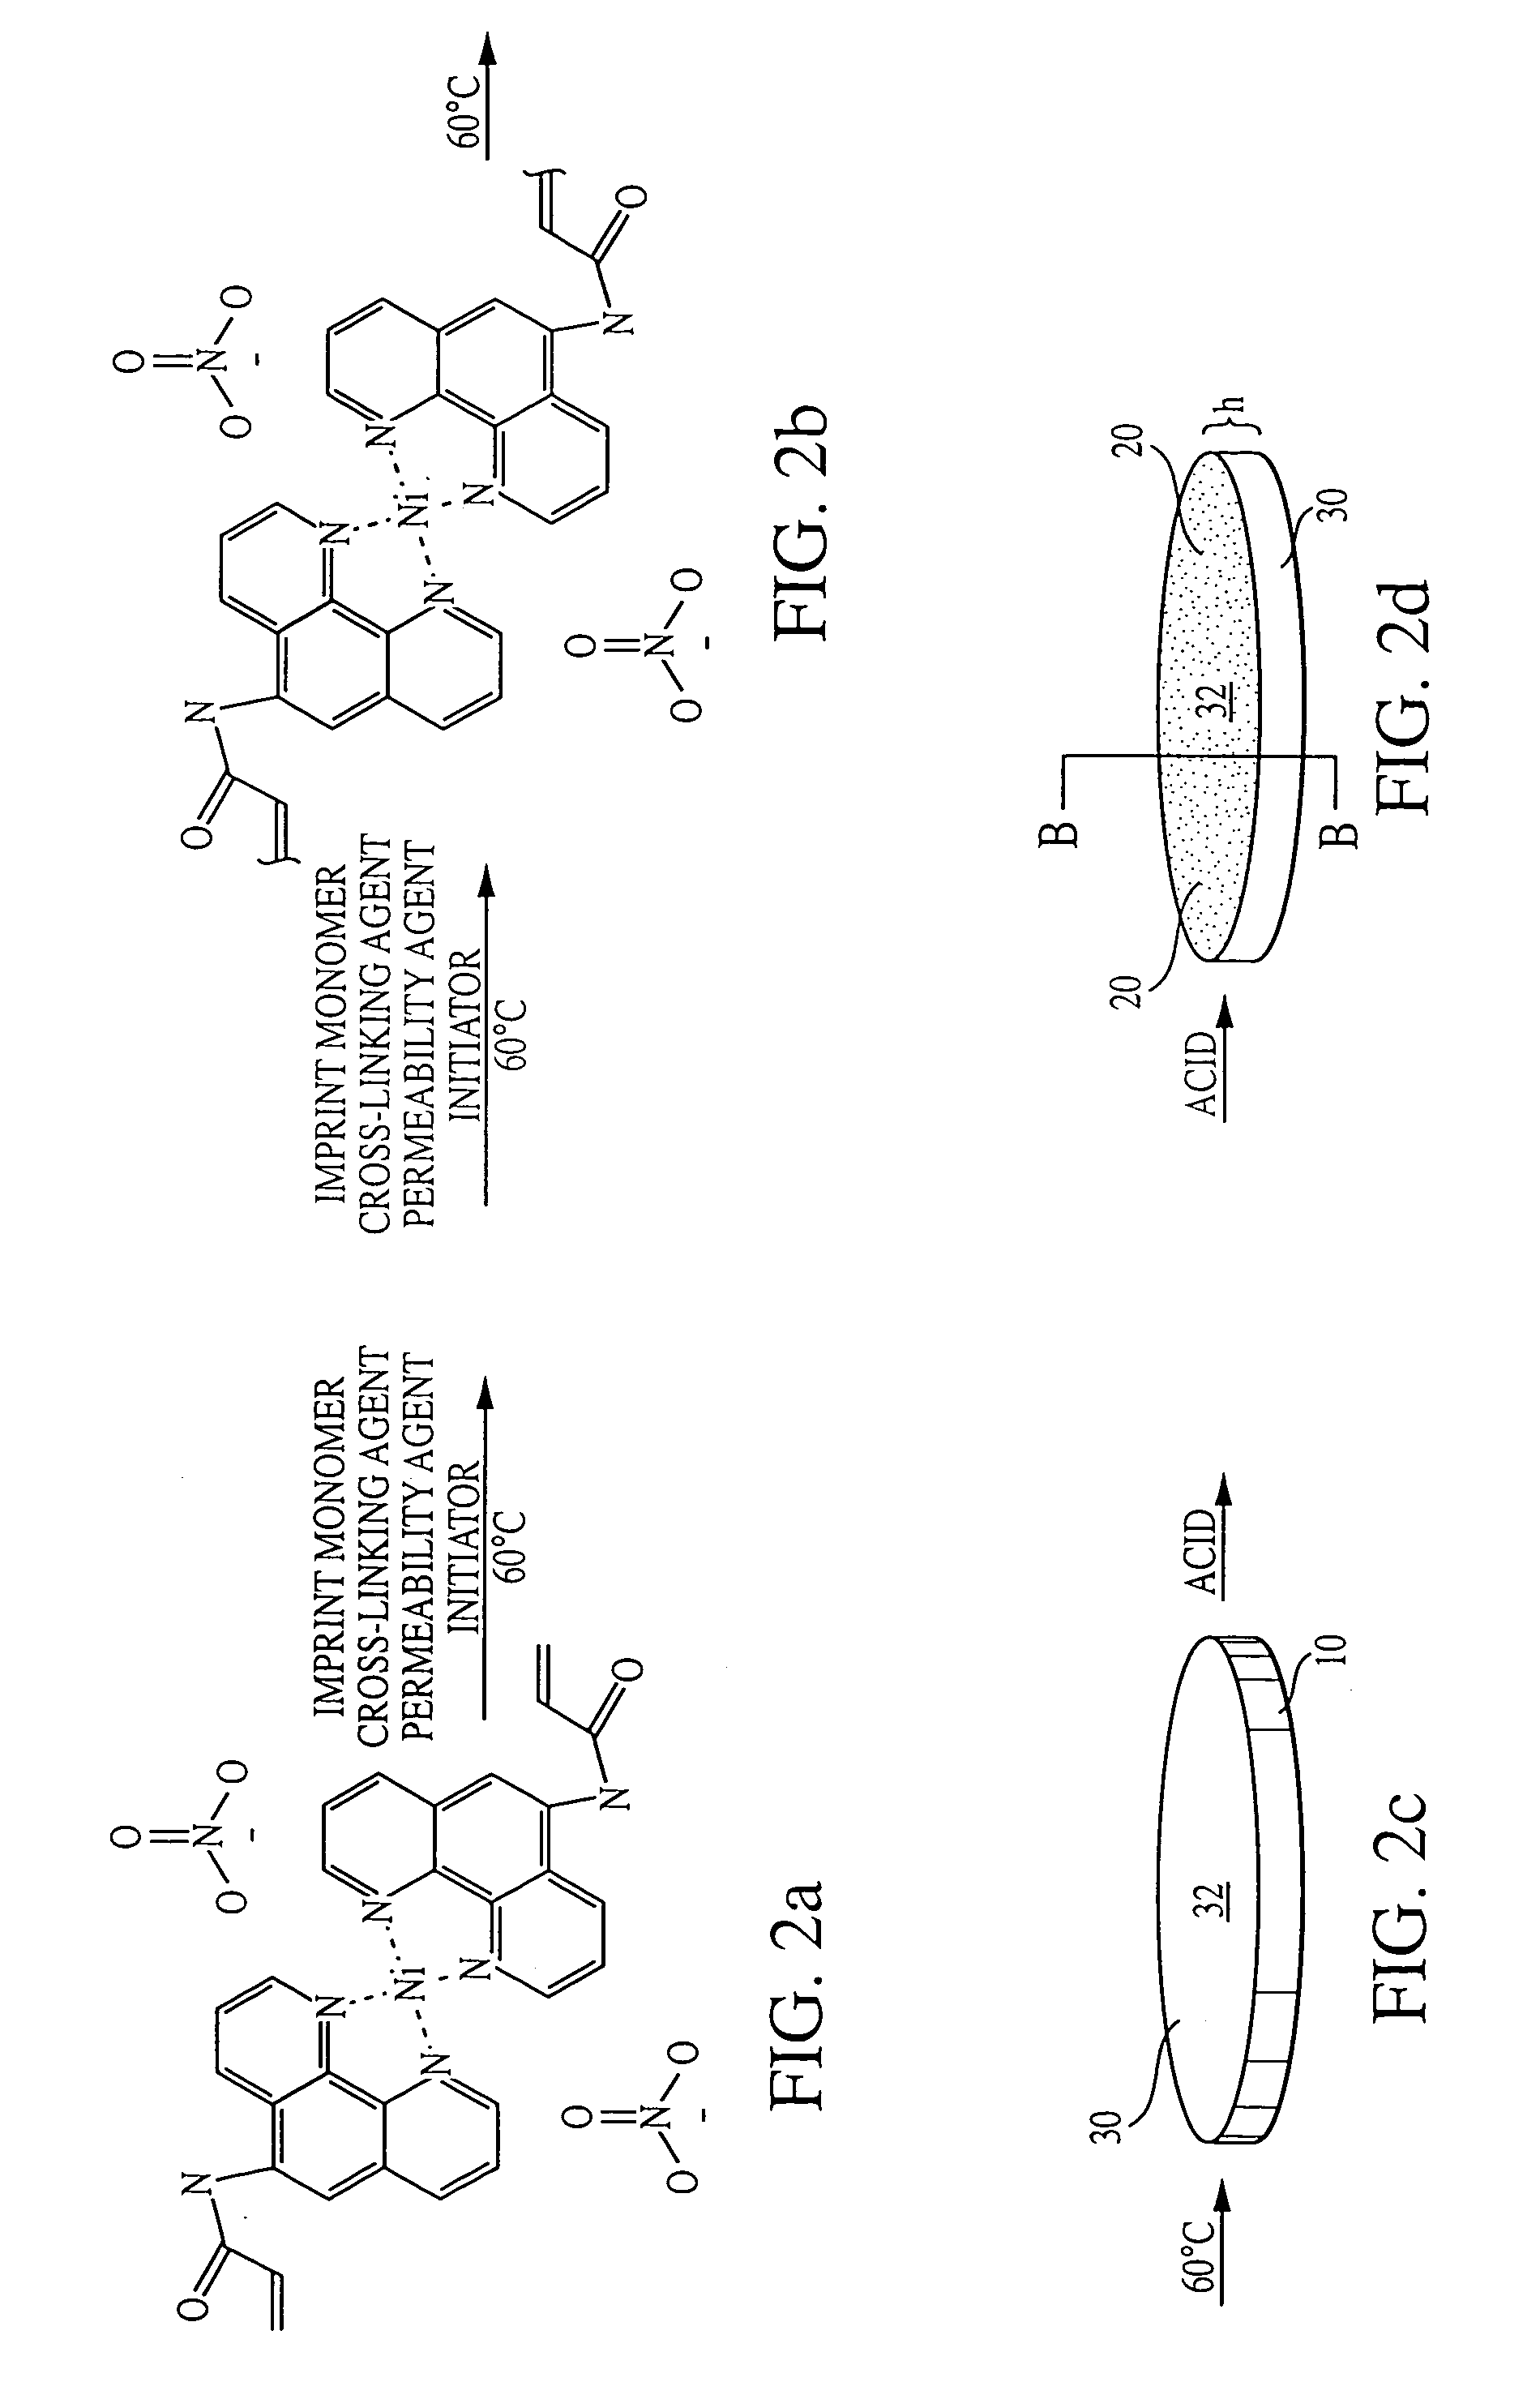 Polymer based permeable membrane for removal of ions